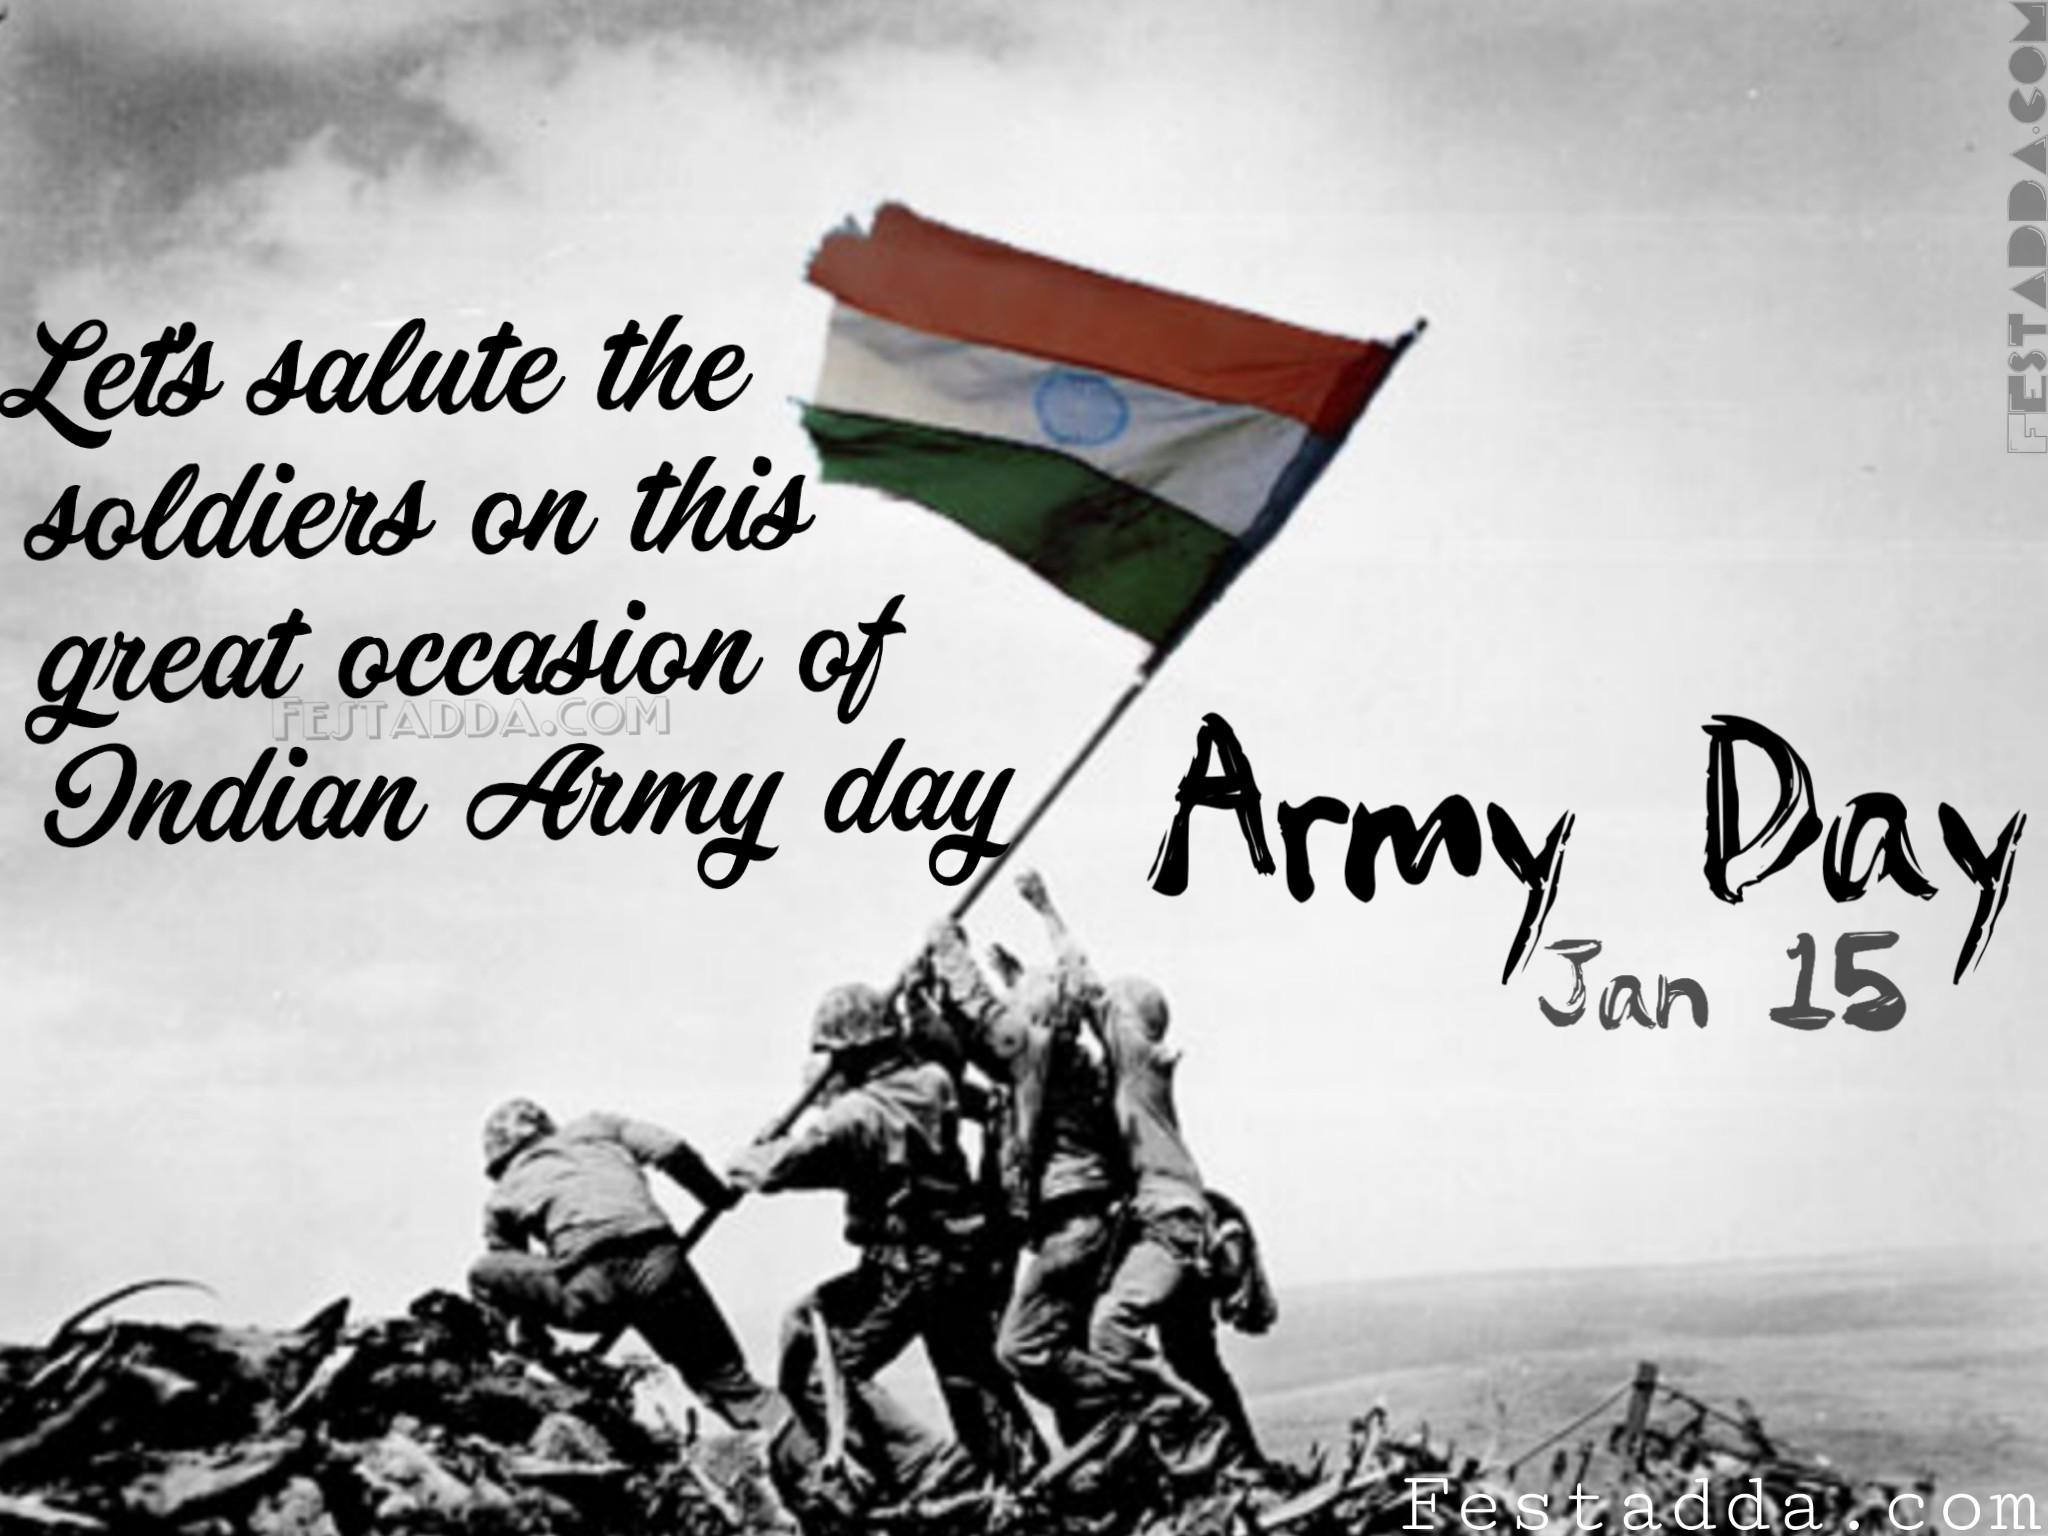 army day india wallpapers wallpaper cave army day india wallpapers wallpaper cave